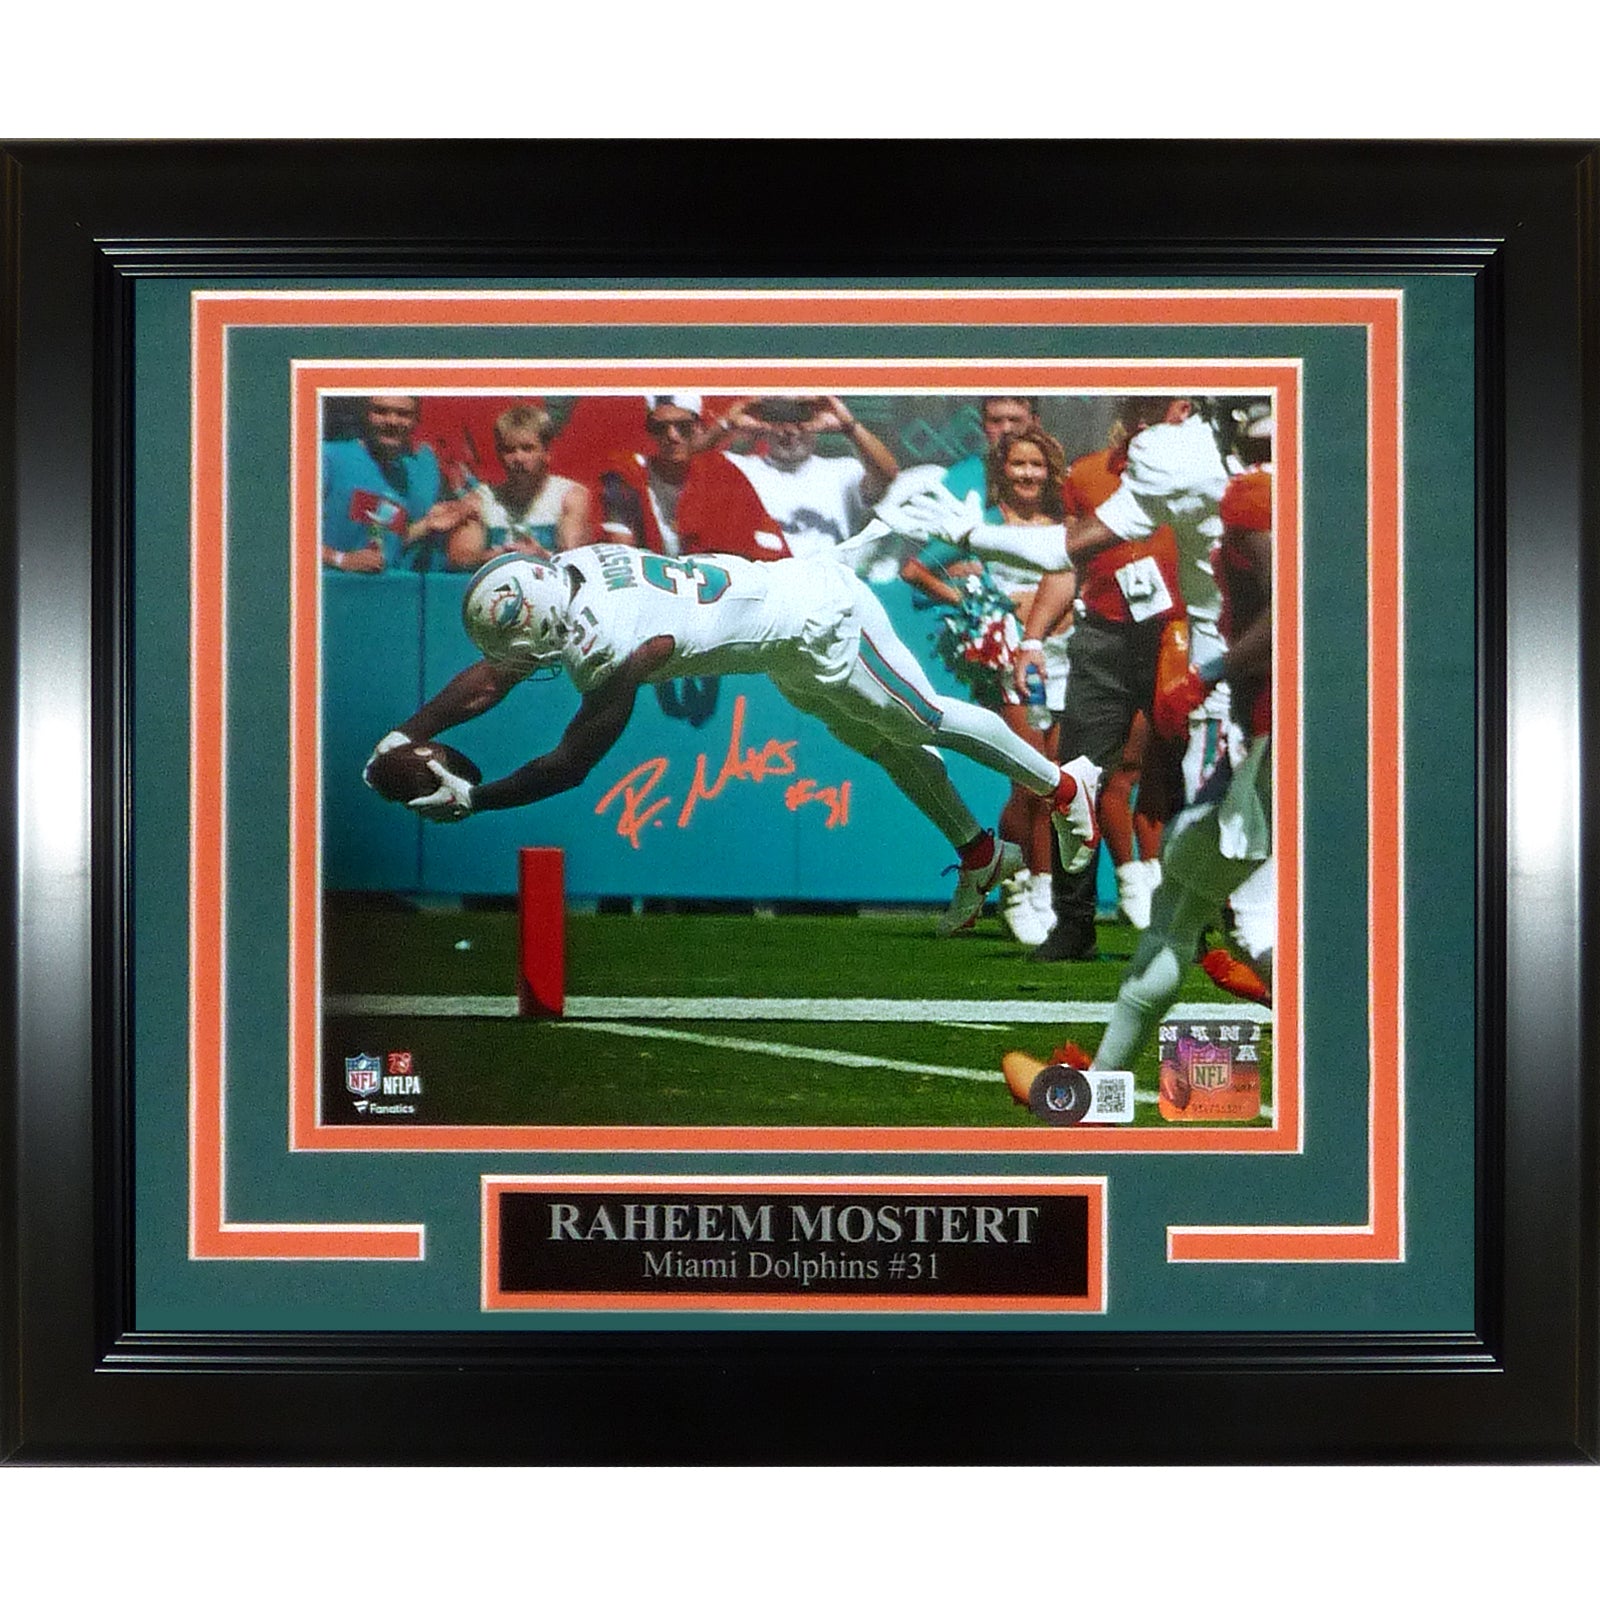 Raheem Mostert Autographed Miami Dolphins (TD Dive) Deluxe Framed 8x10 Photo - Beckett